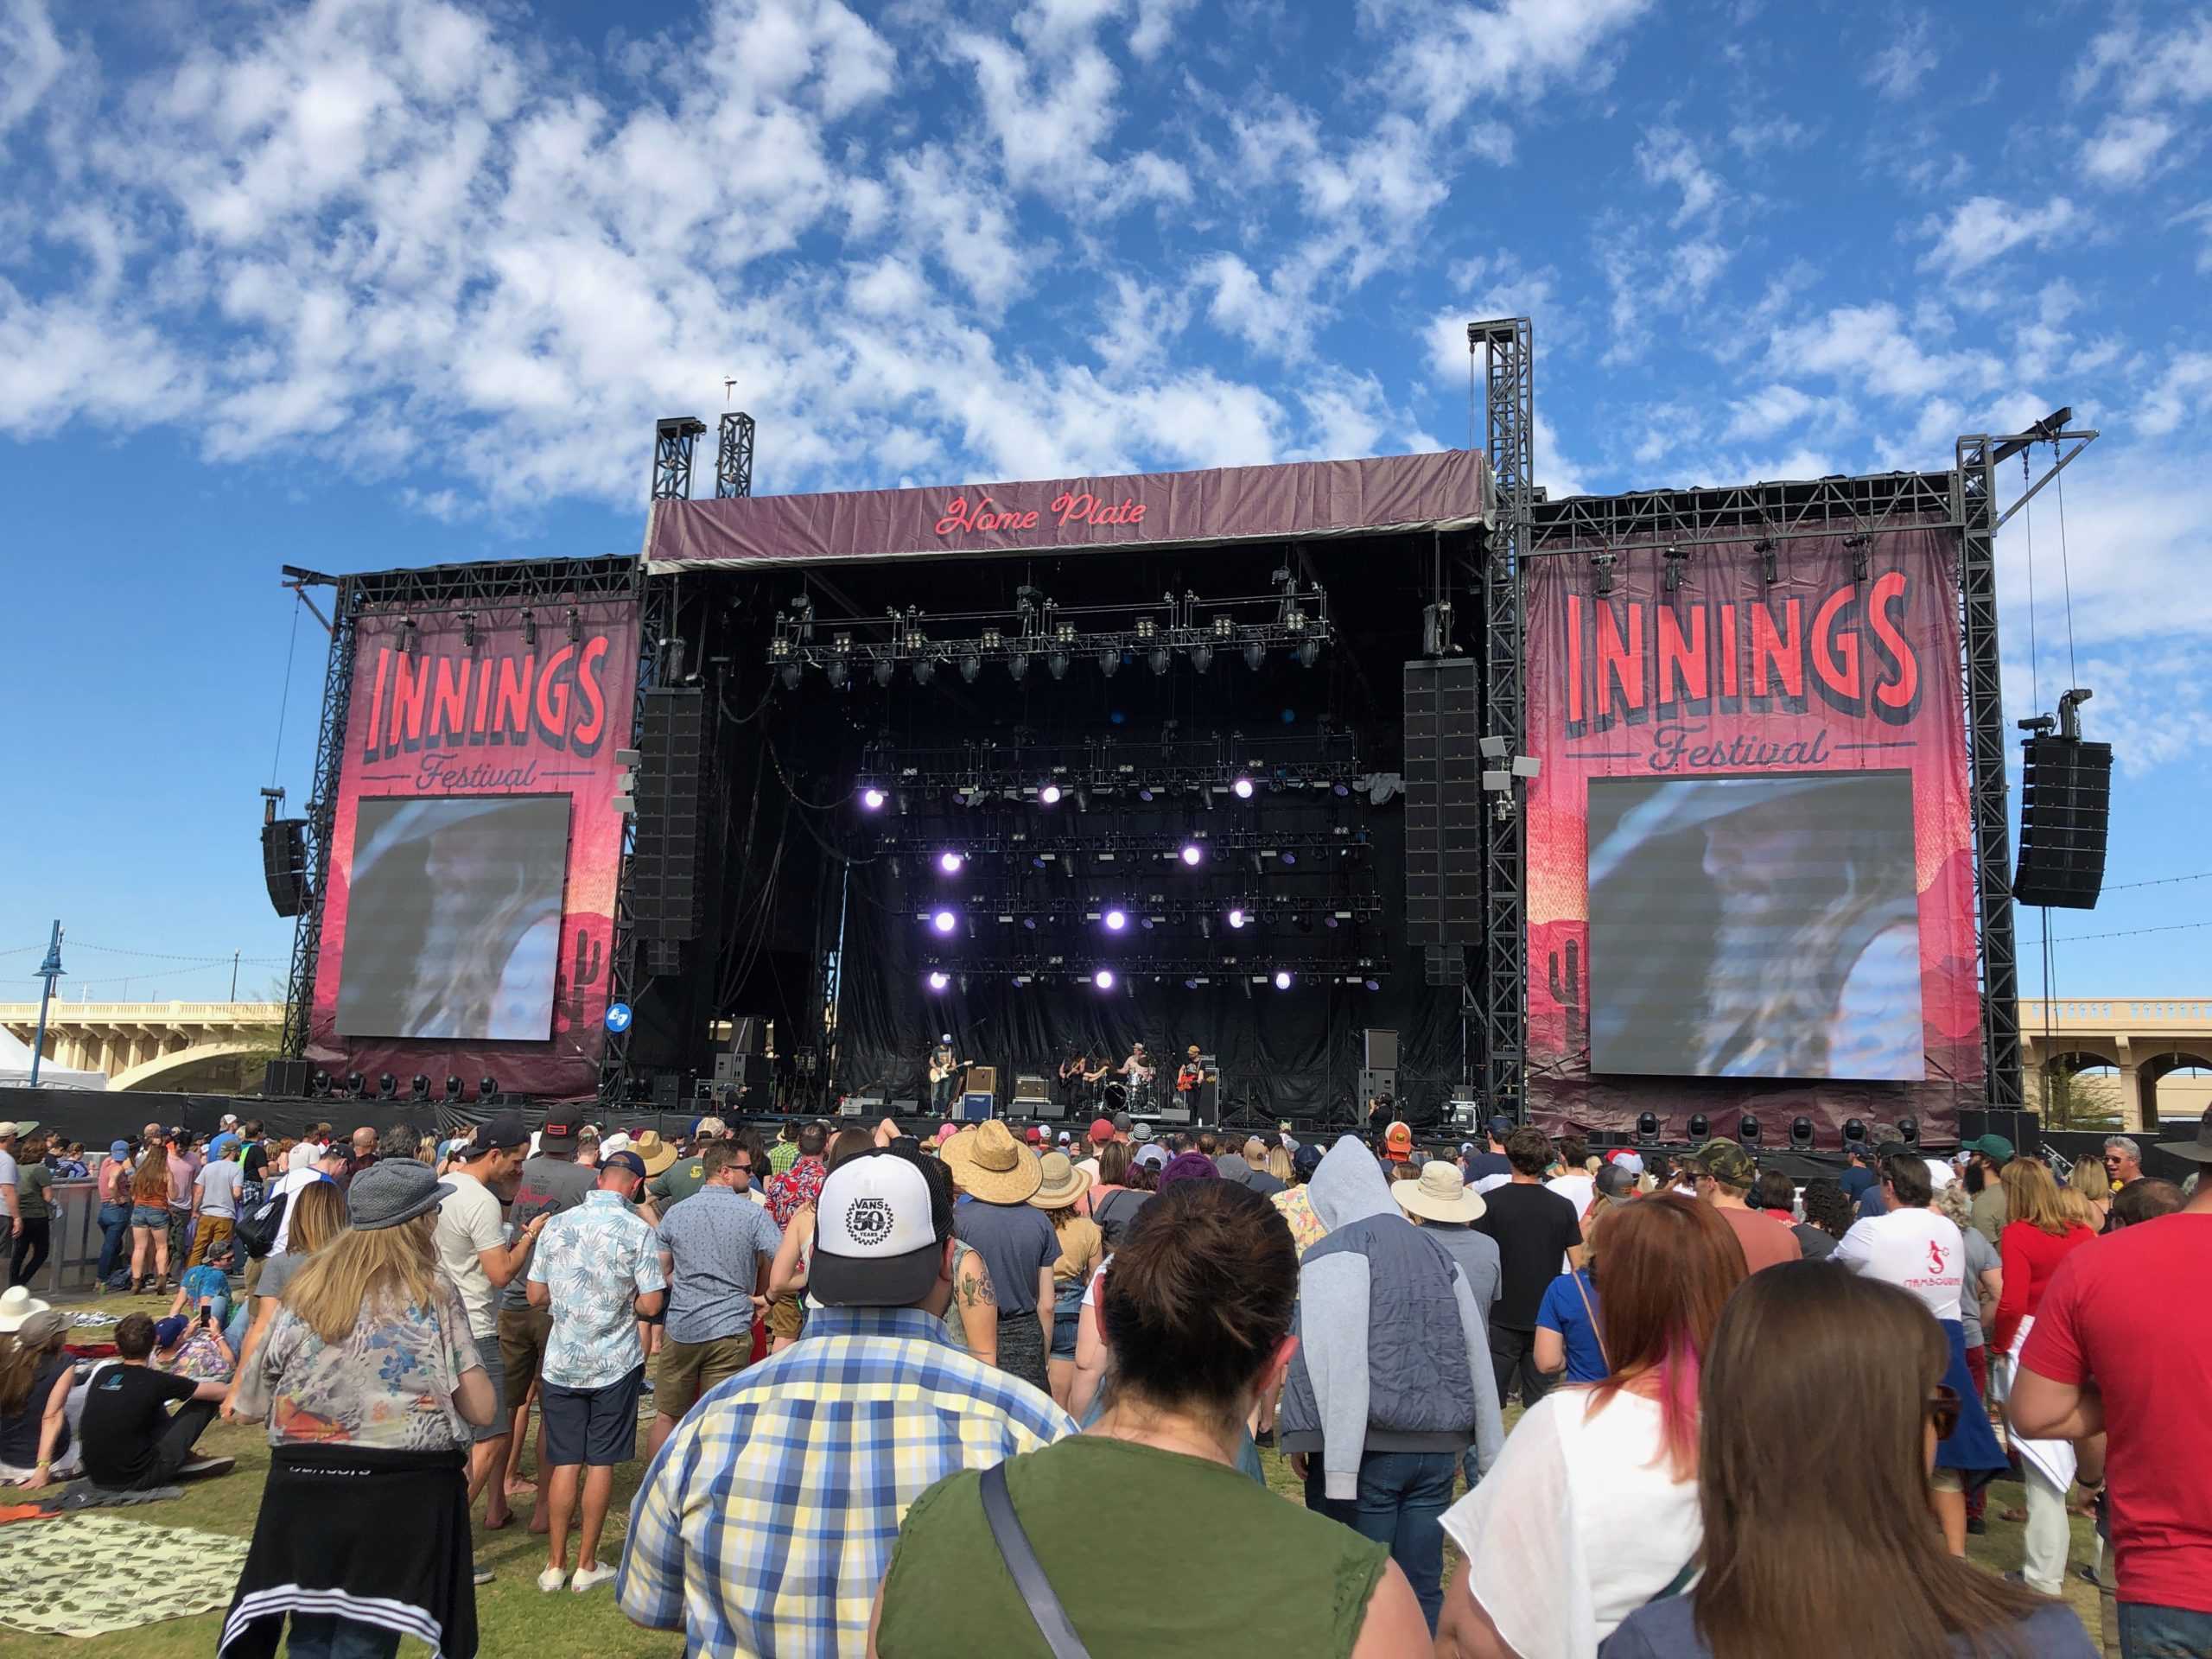  Innings Festival 2020: Tempe Beach Park Hosts It’s 3rd Annual Event To Kick Off Spring Training